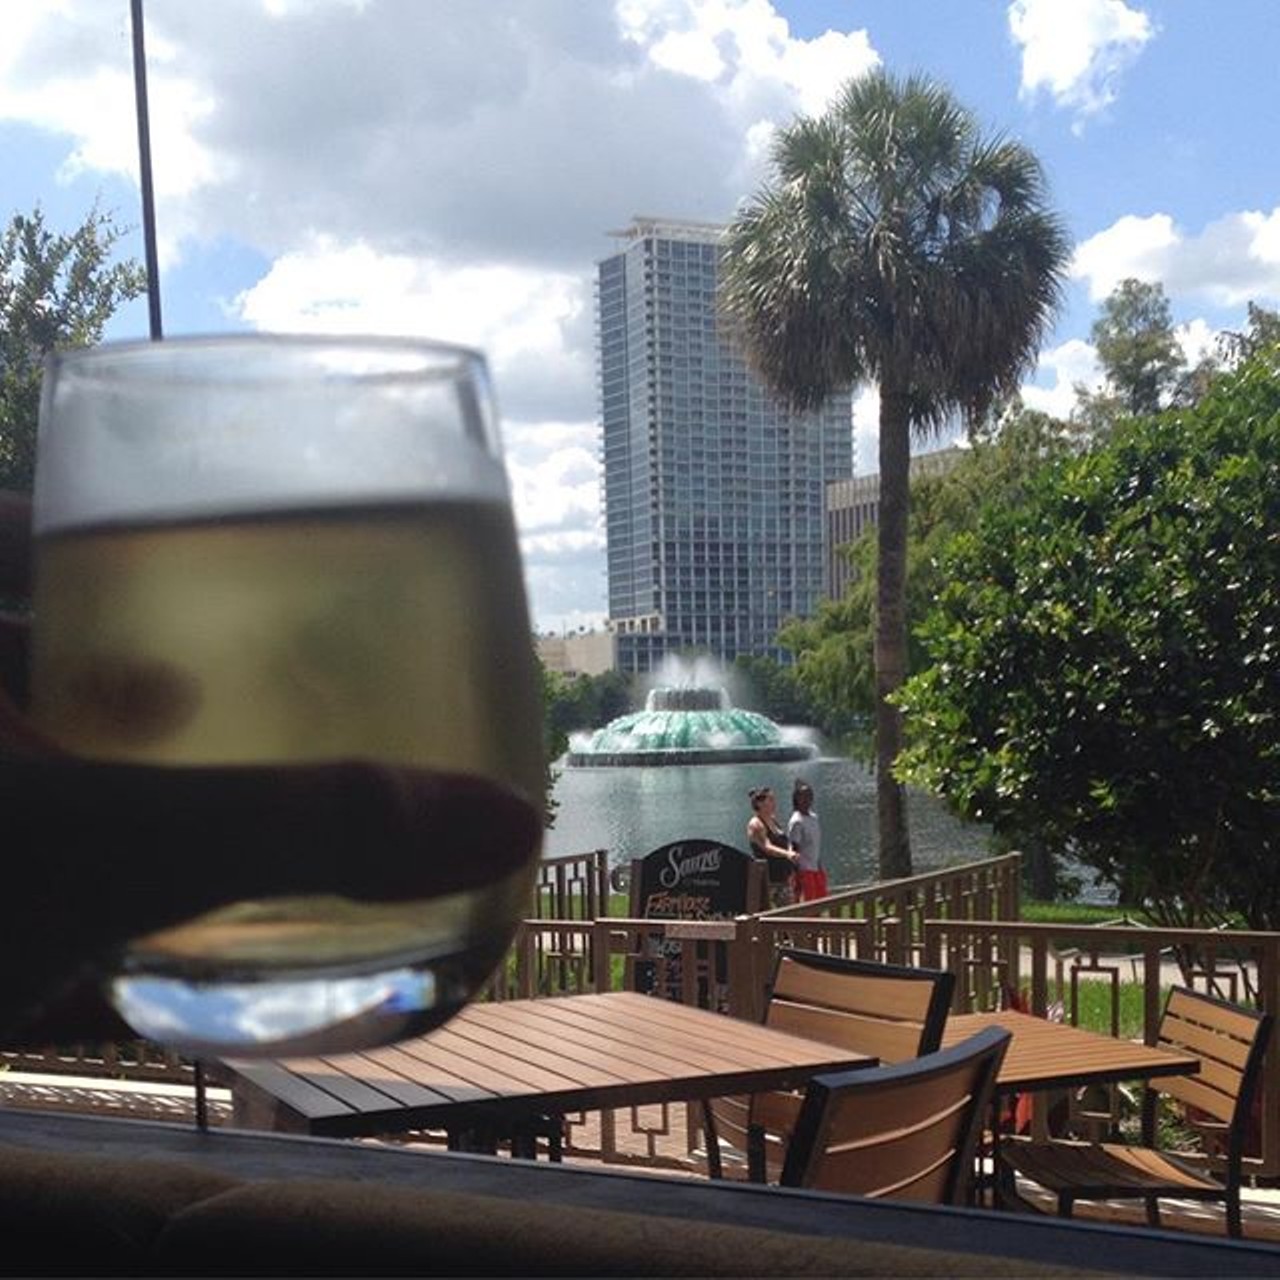 World of Beer Orlando
431 E. Central Blvd, Orlando
407-270-5541
Nothing beats the view of Lake Eola from World of Beer's wrap-around patio. Be sure to visit their website for a full list of events at this Orlando location. Photo via amanda_kriss on Instagram.